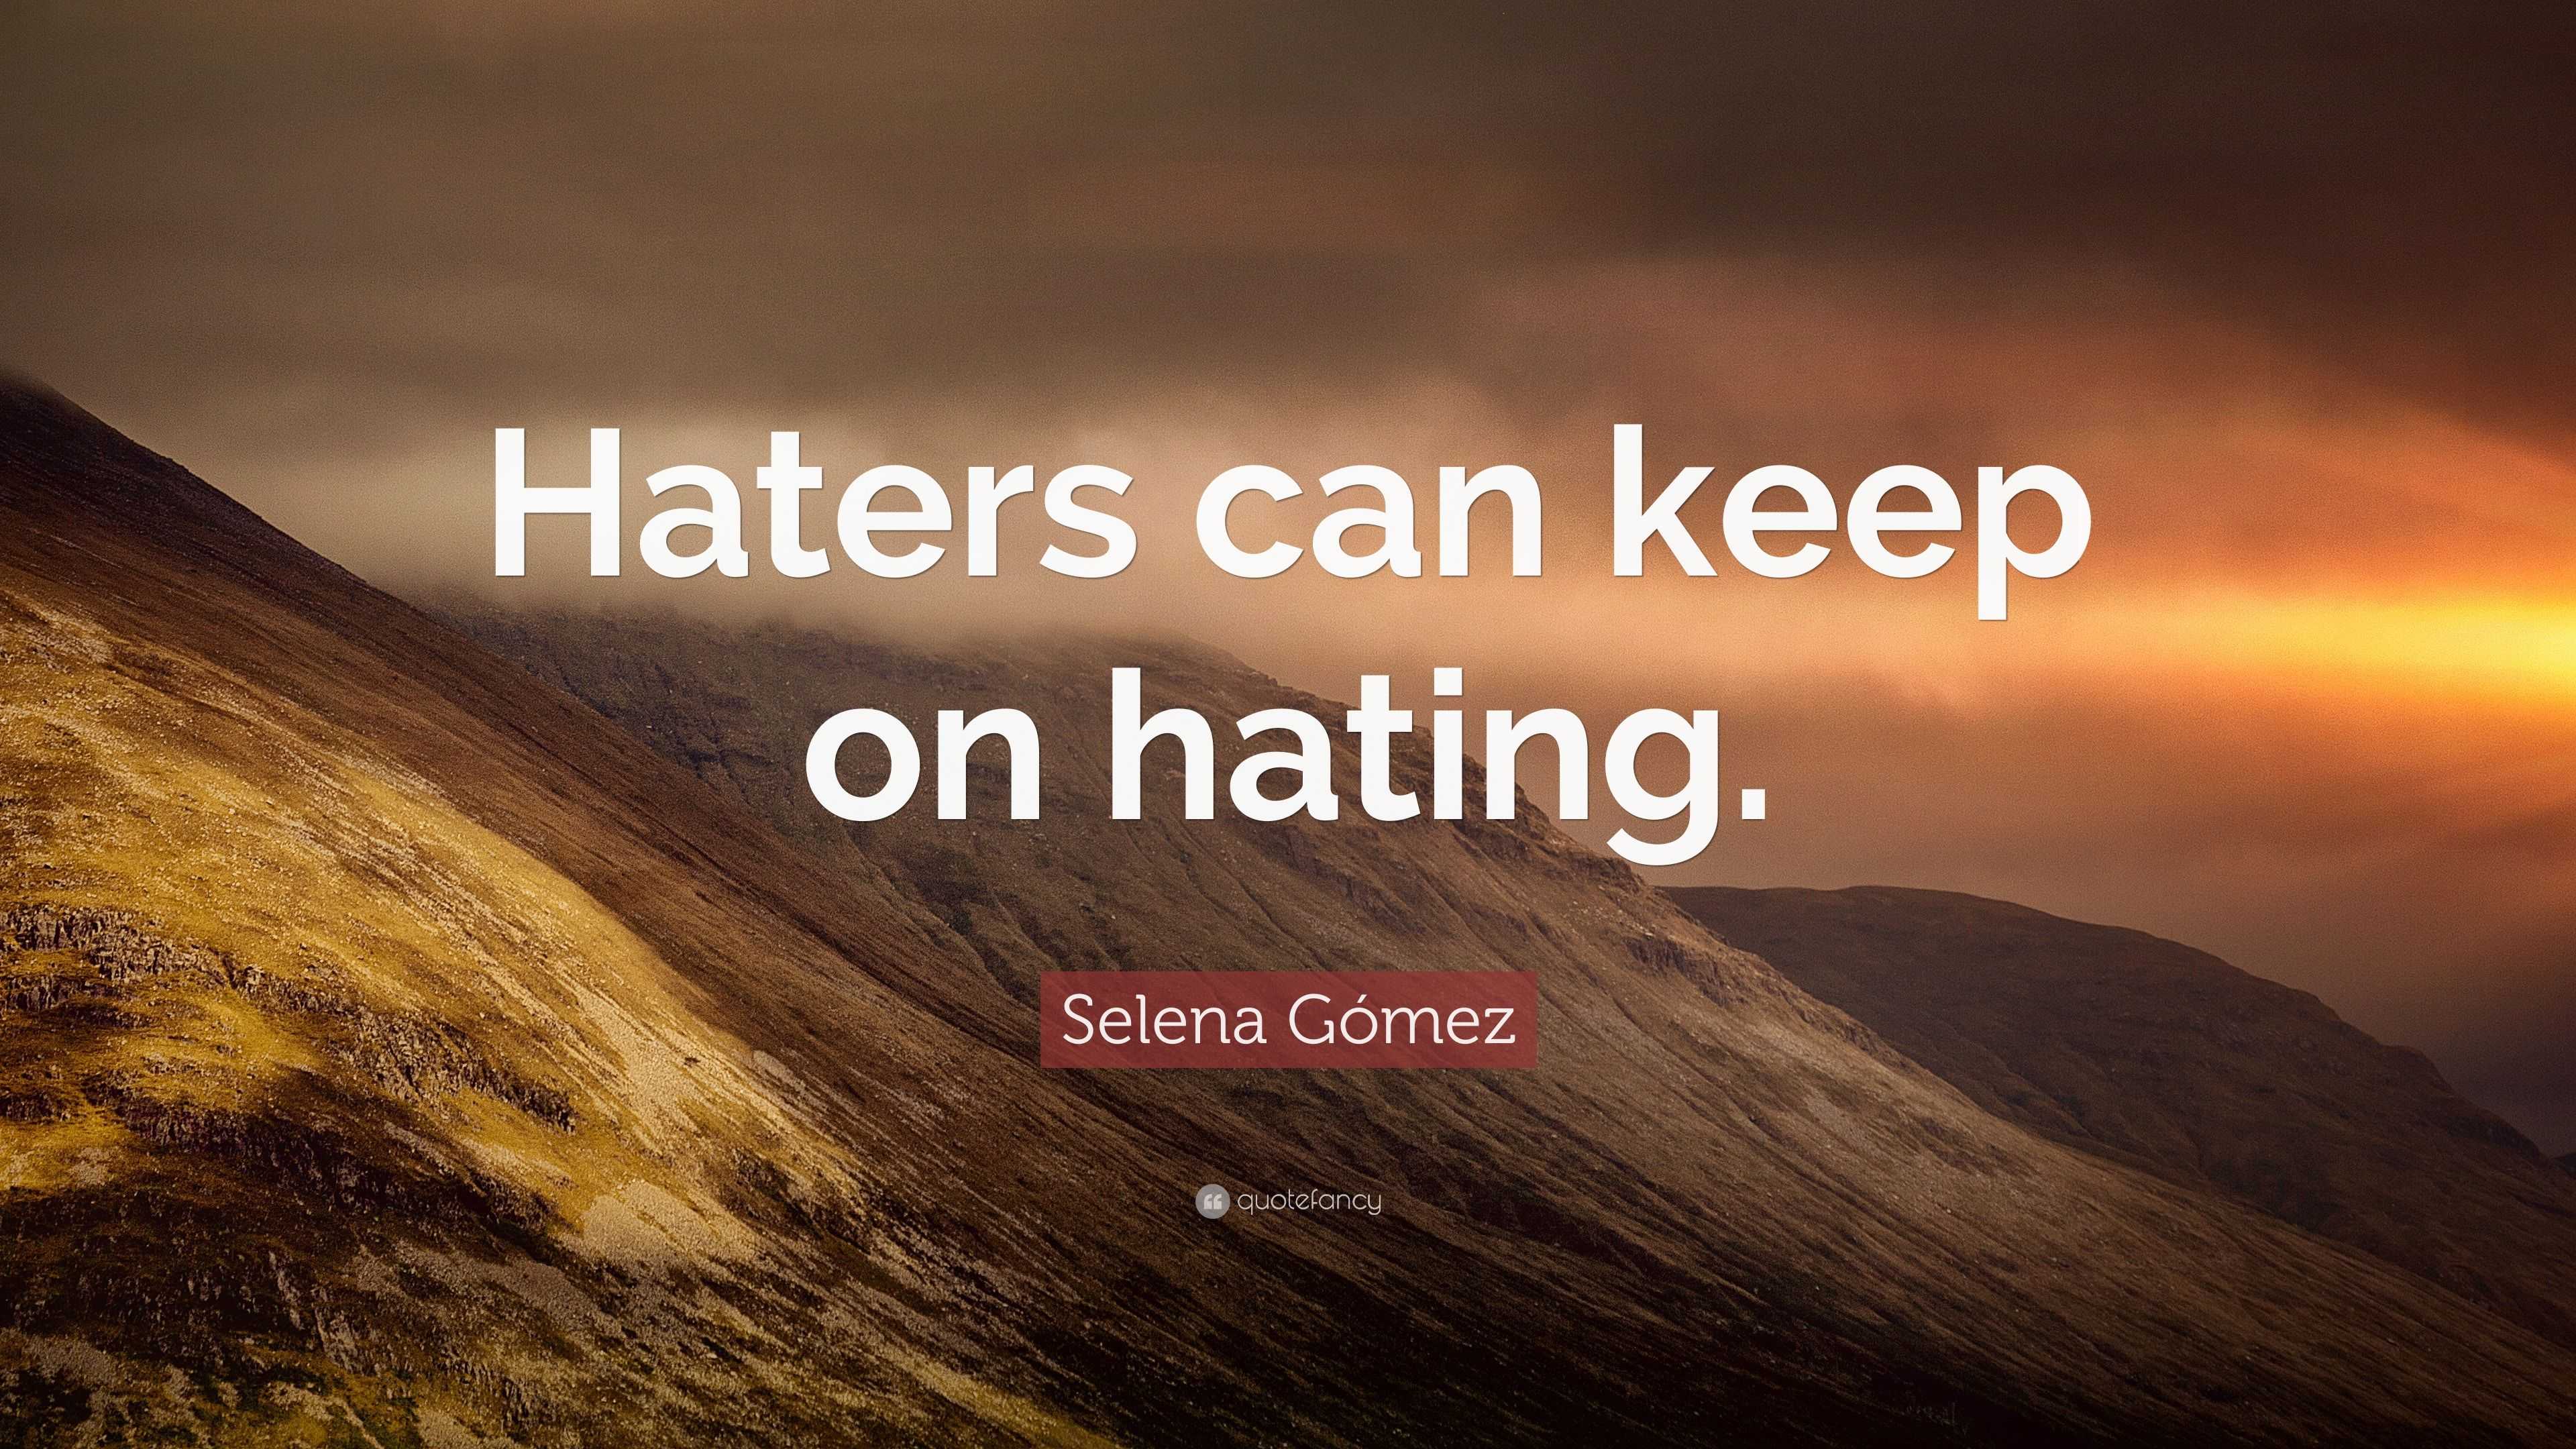 haters keep hating quotes